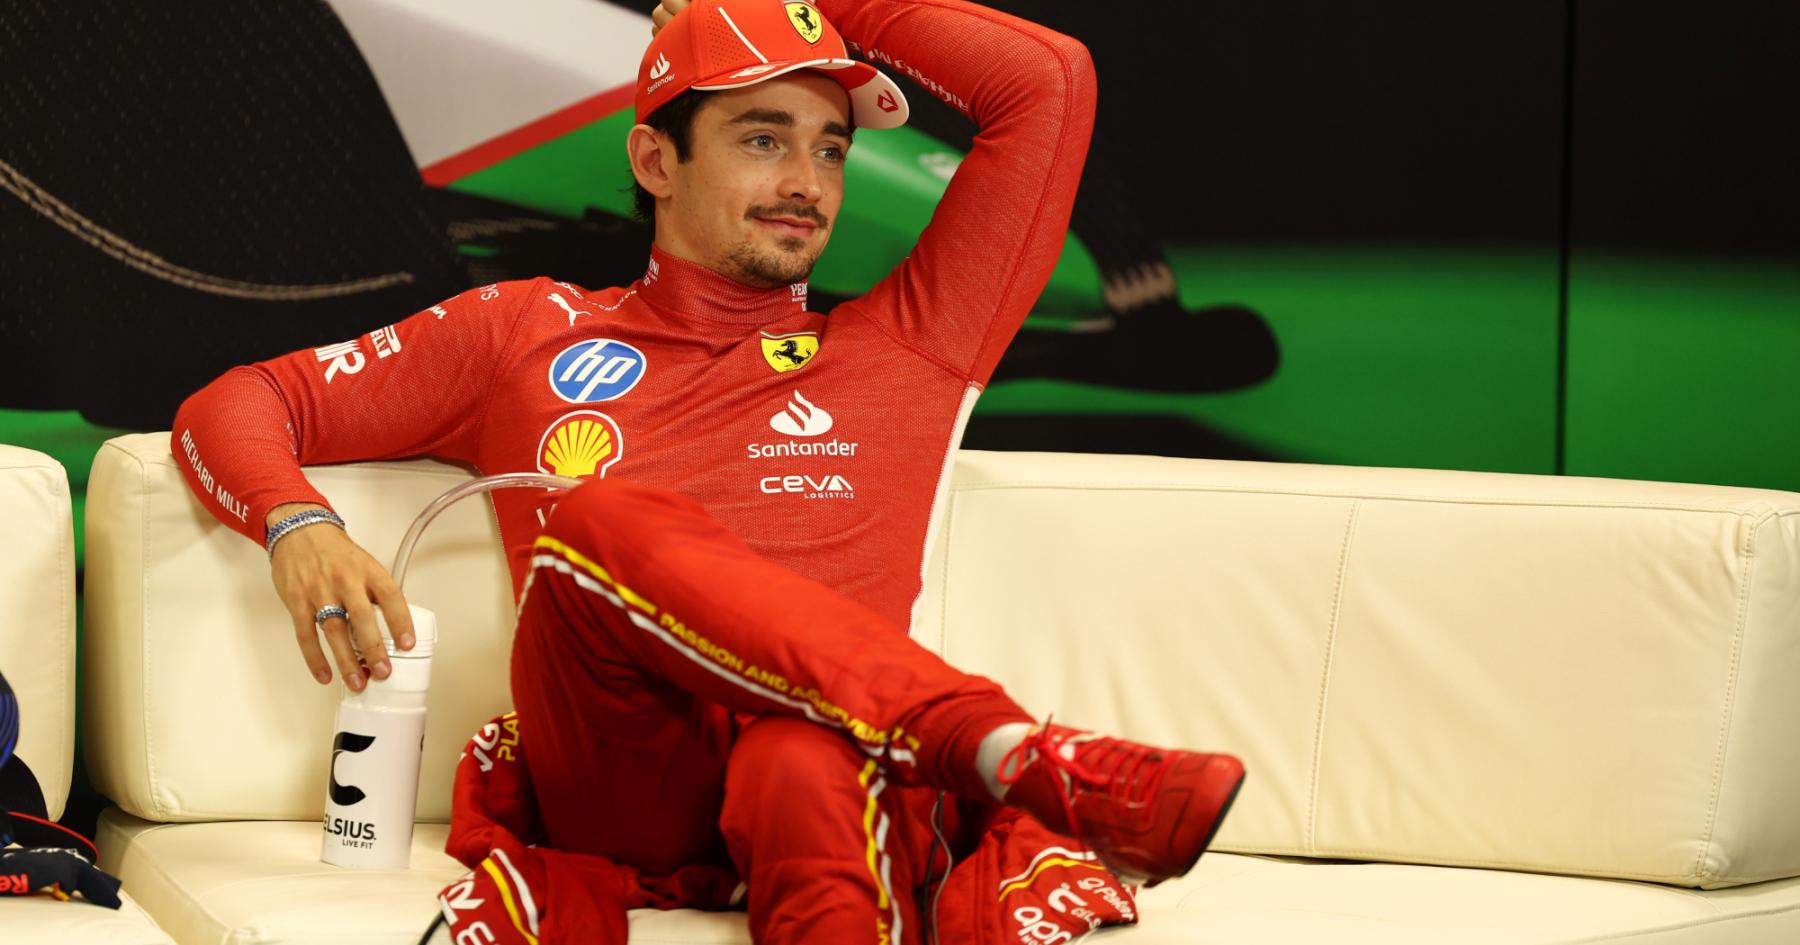 Leclerc's Bold Move: An Inside Look at the Sudden F1 Engineer Swap